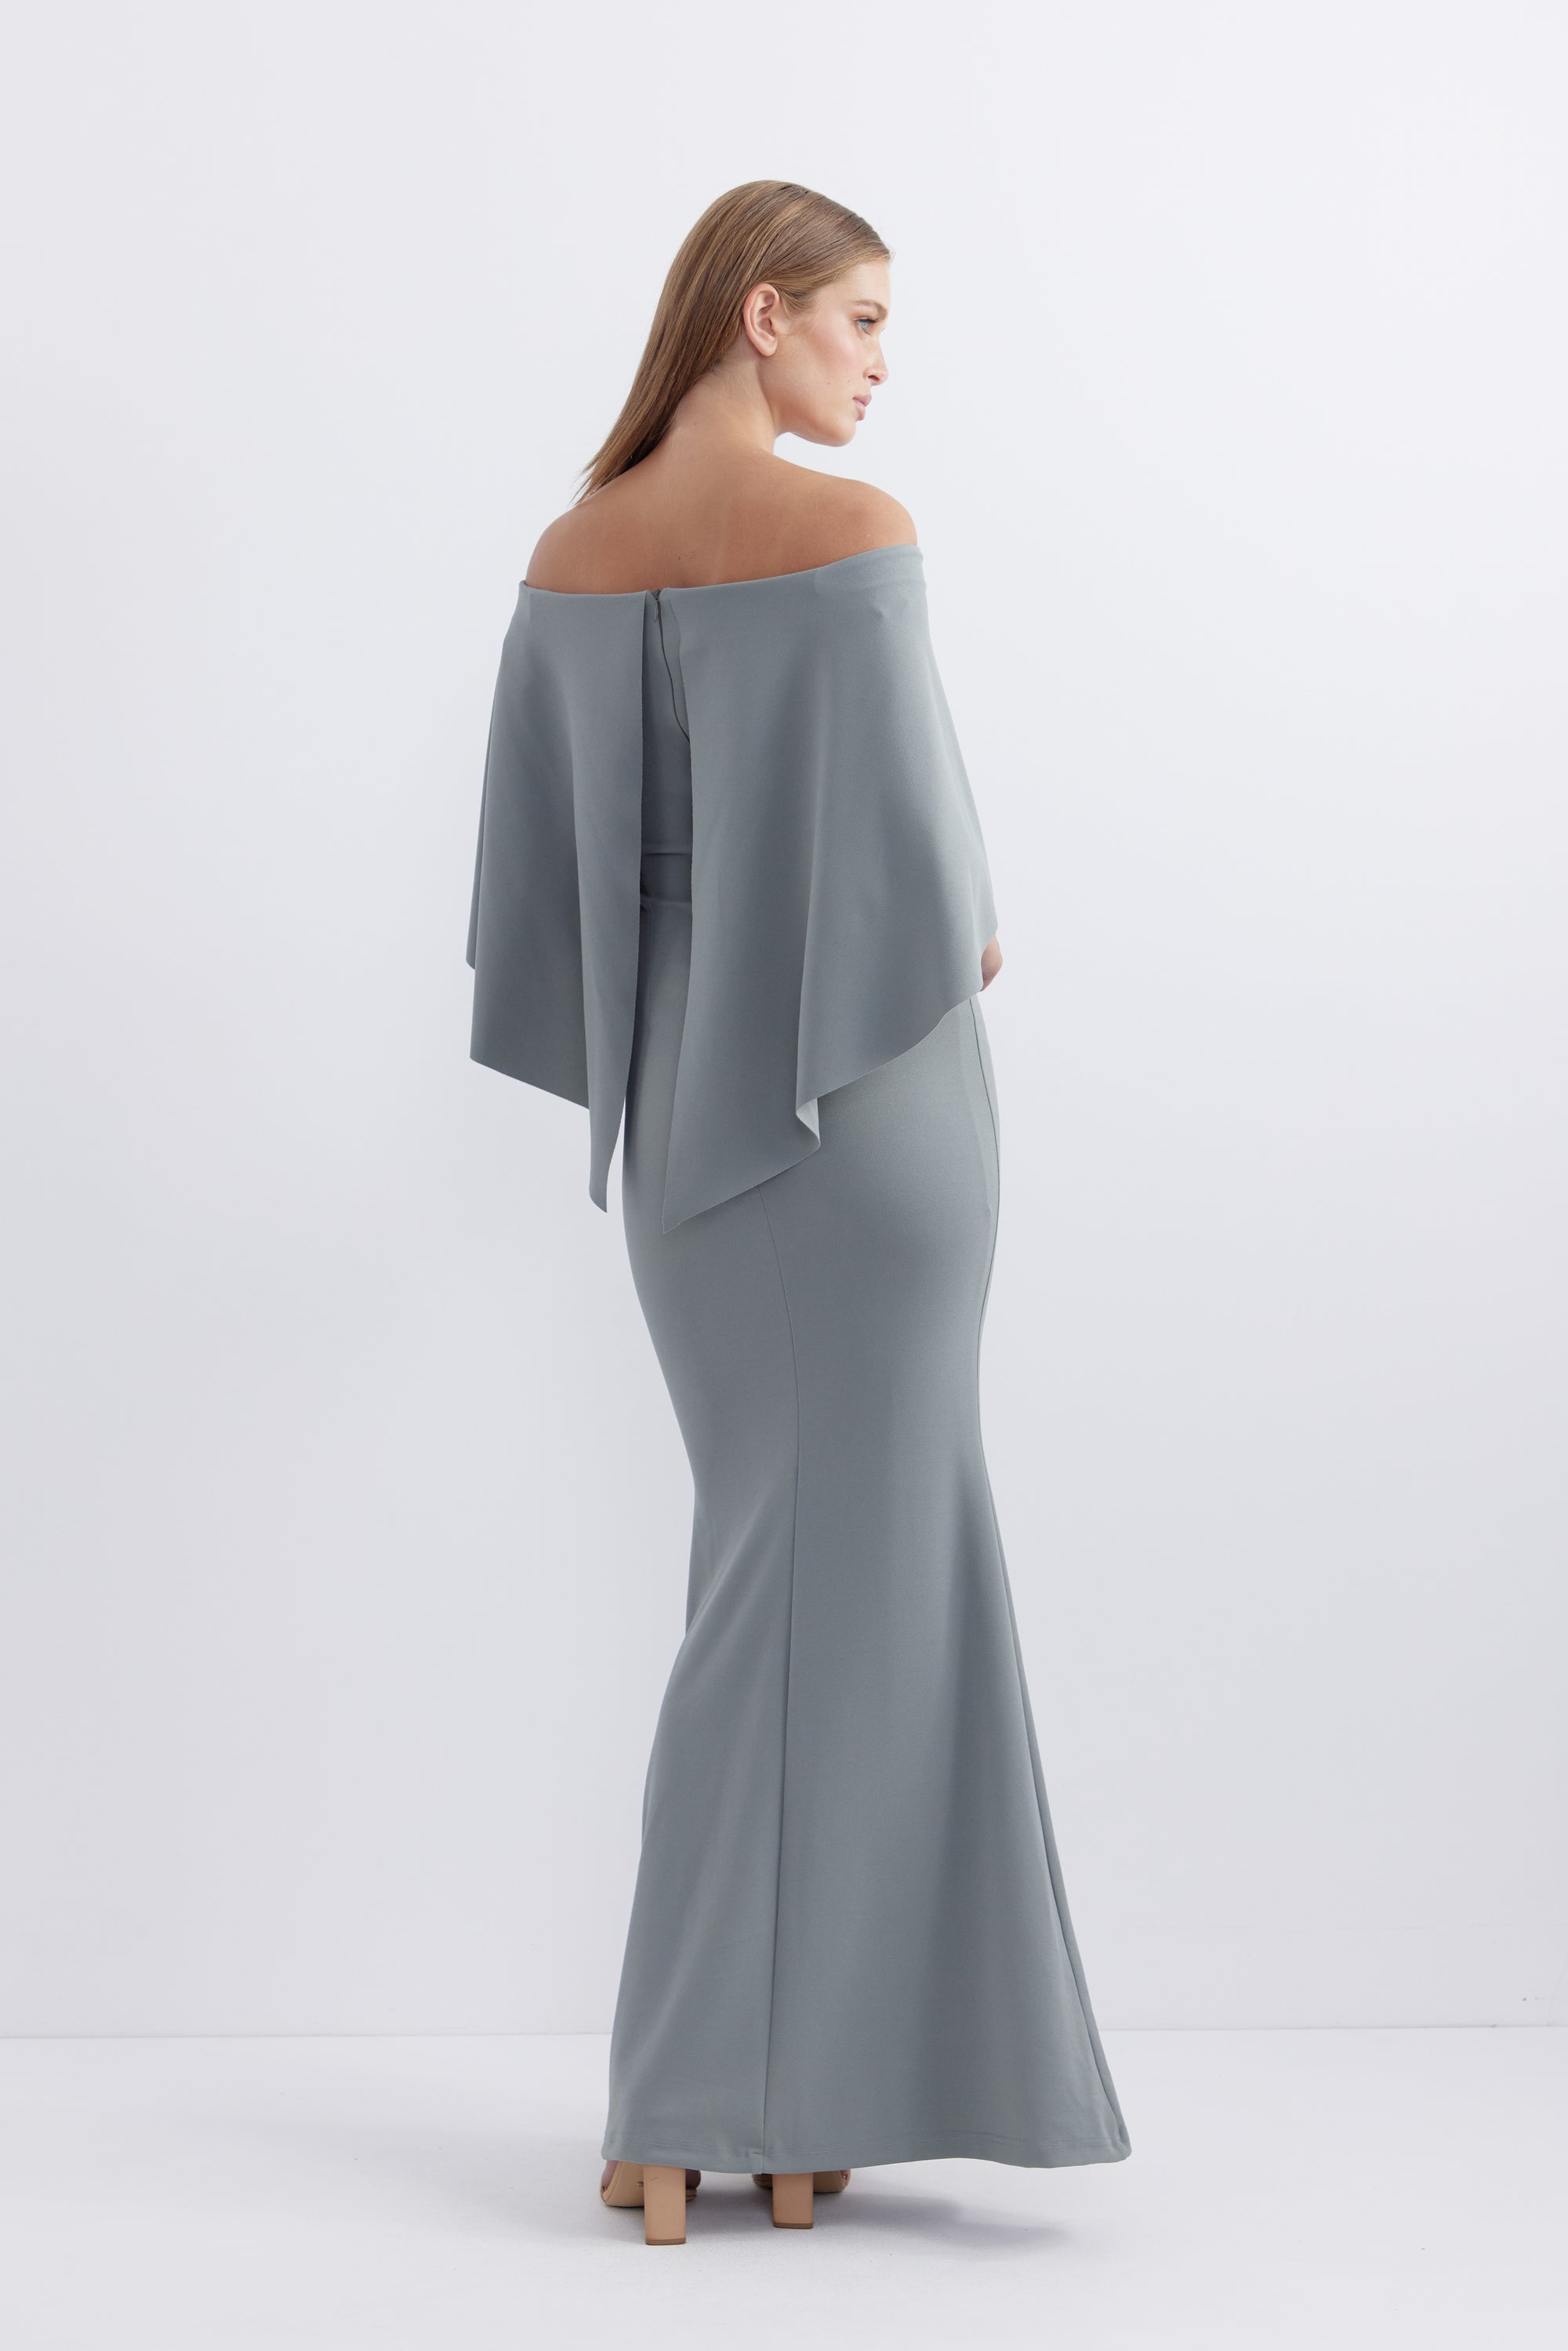 Composure Gown - TAKE 40% OFF DISCOUNT APPLIED AT CHECKOUT